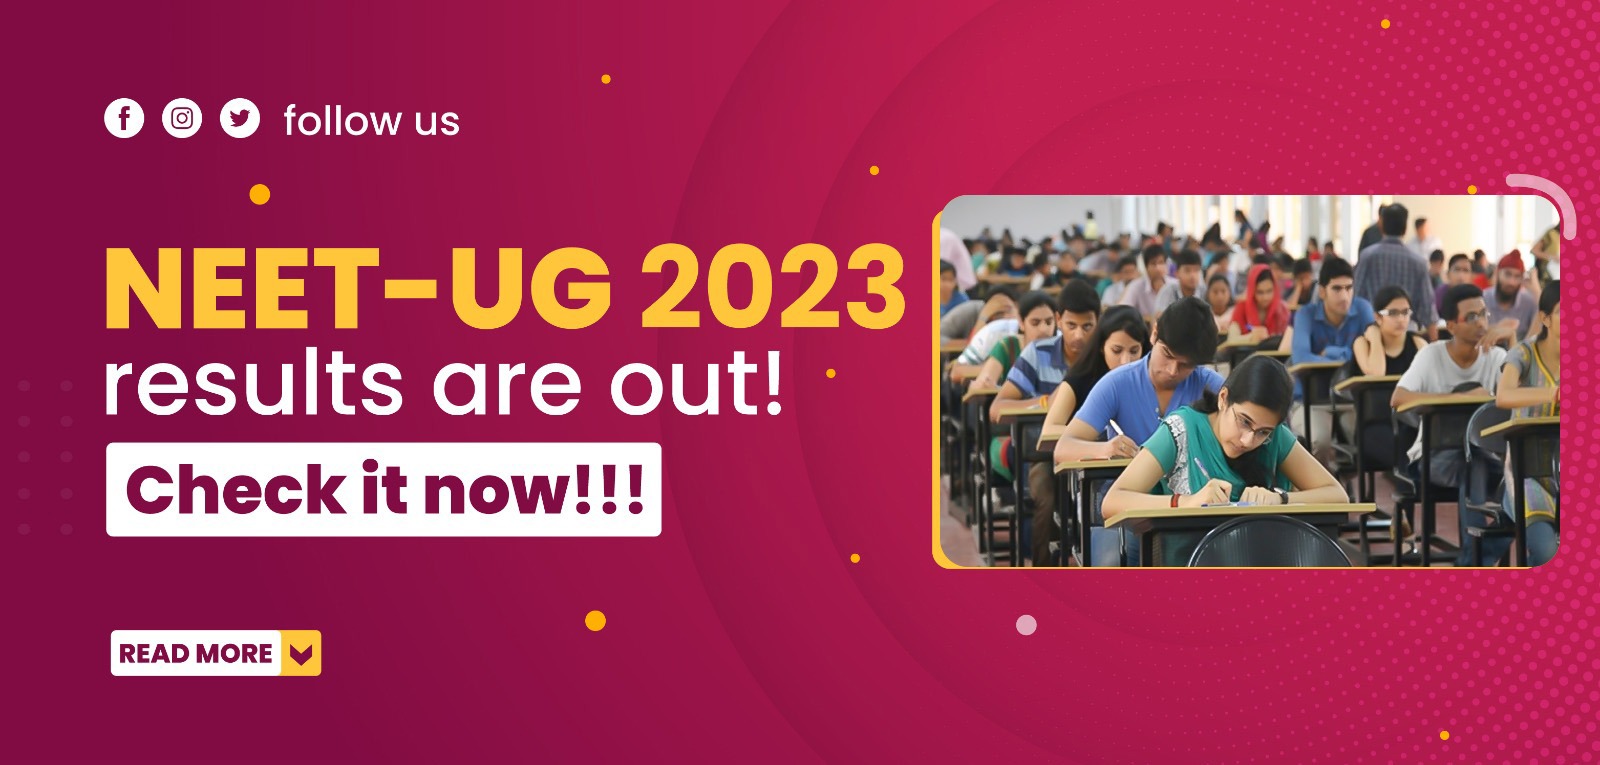 NEET-UG 2023 results are out!